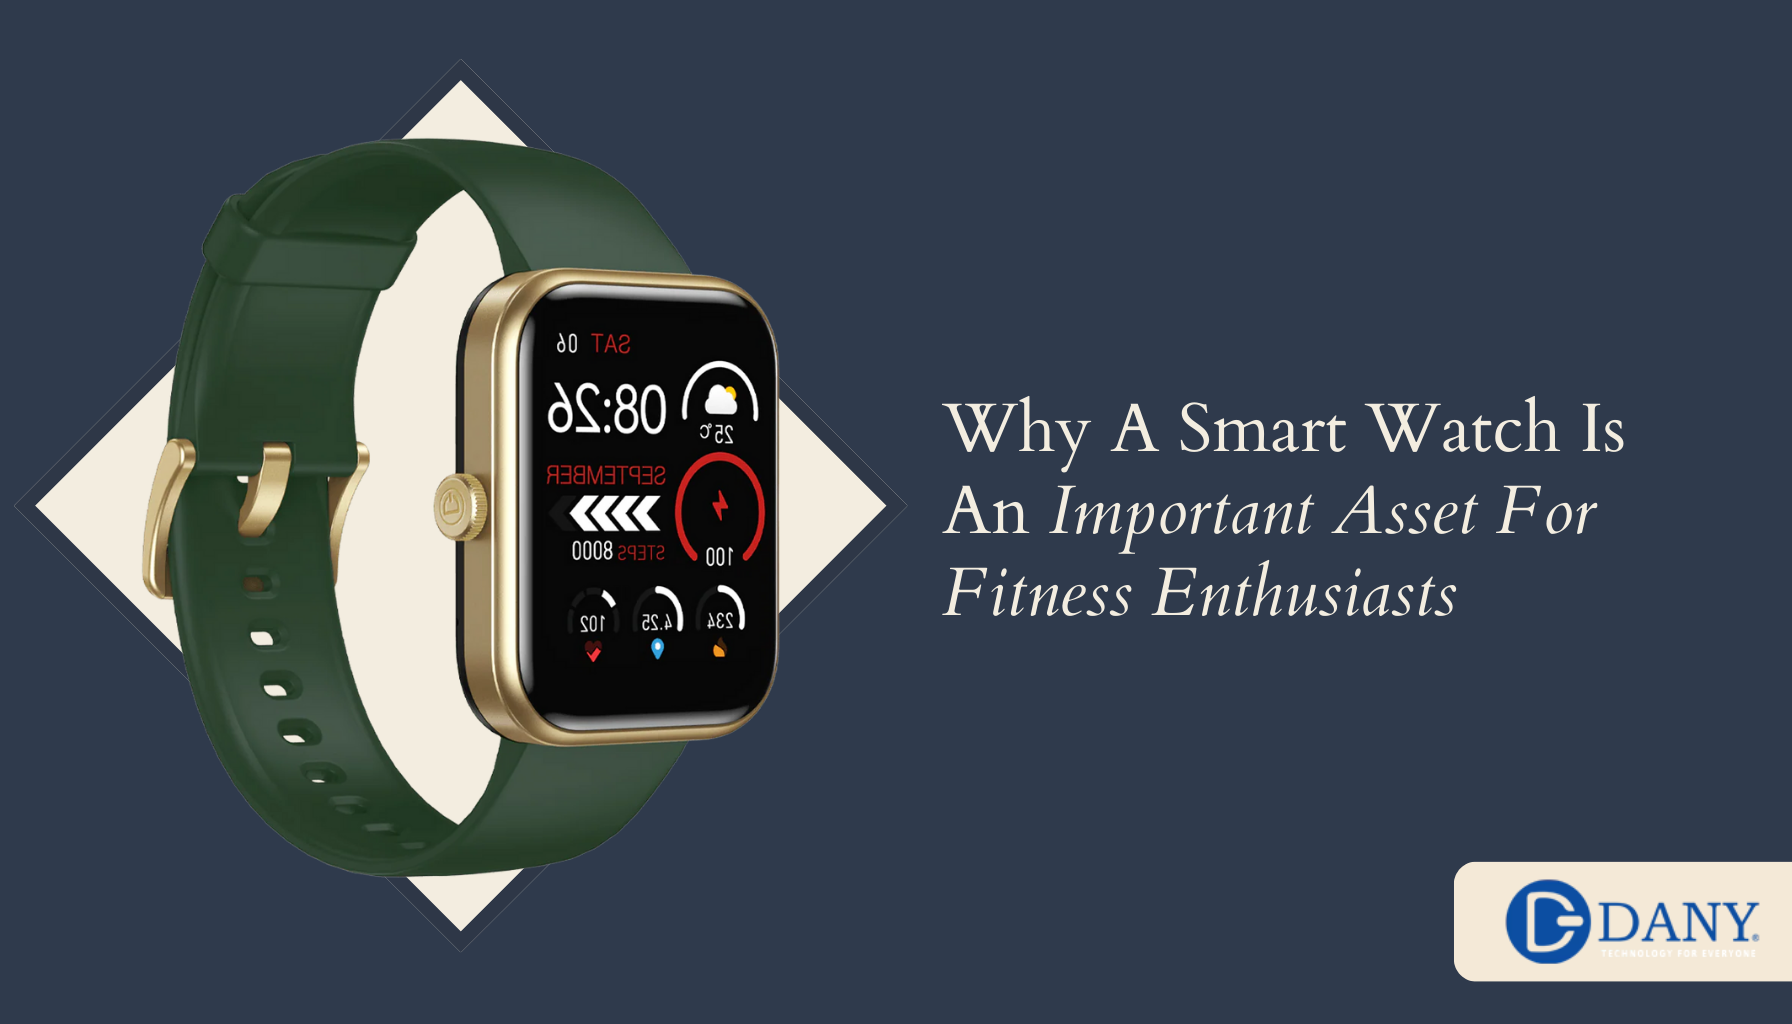 Why A Smart Watch Is An Important Asset For Fitness Enthusiasts